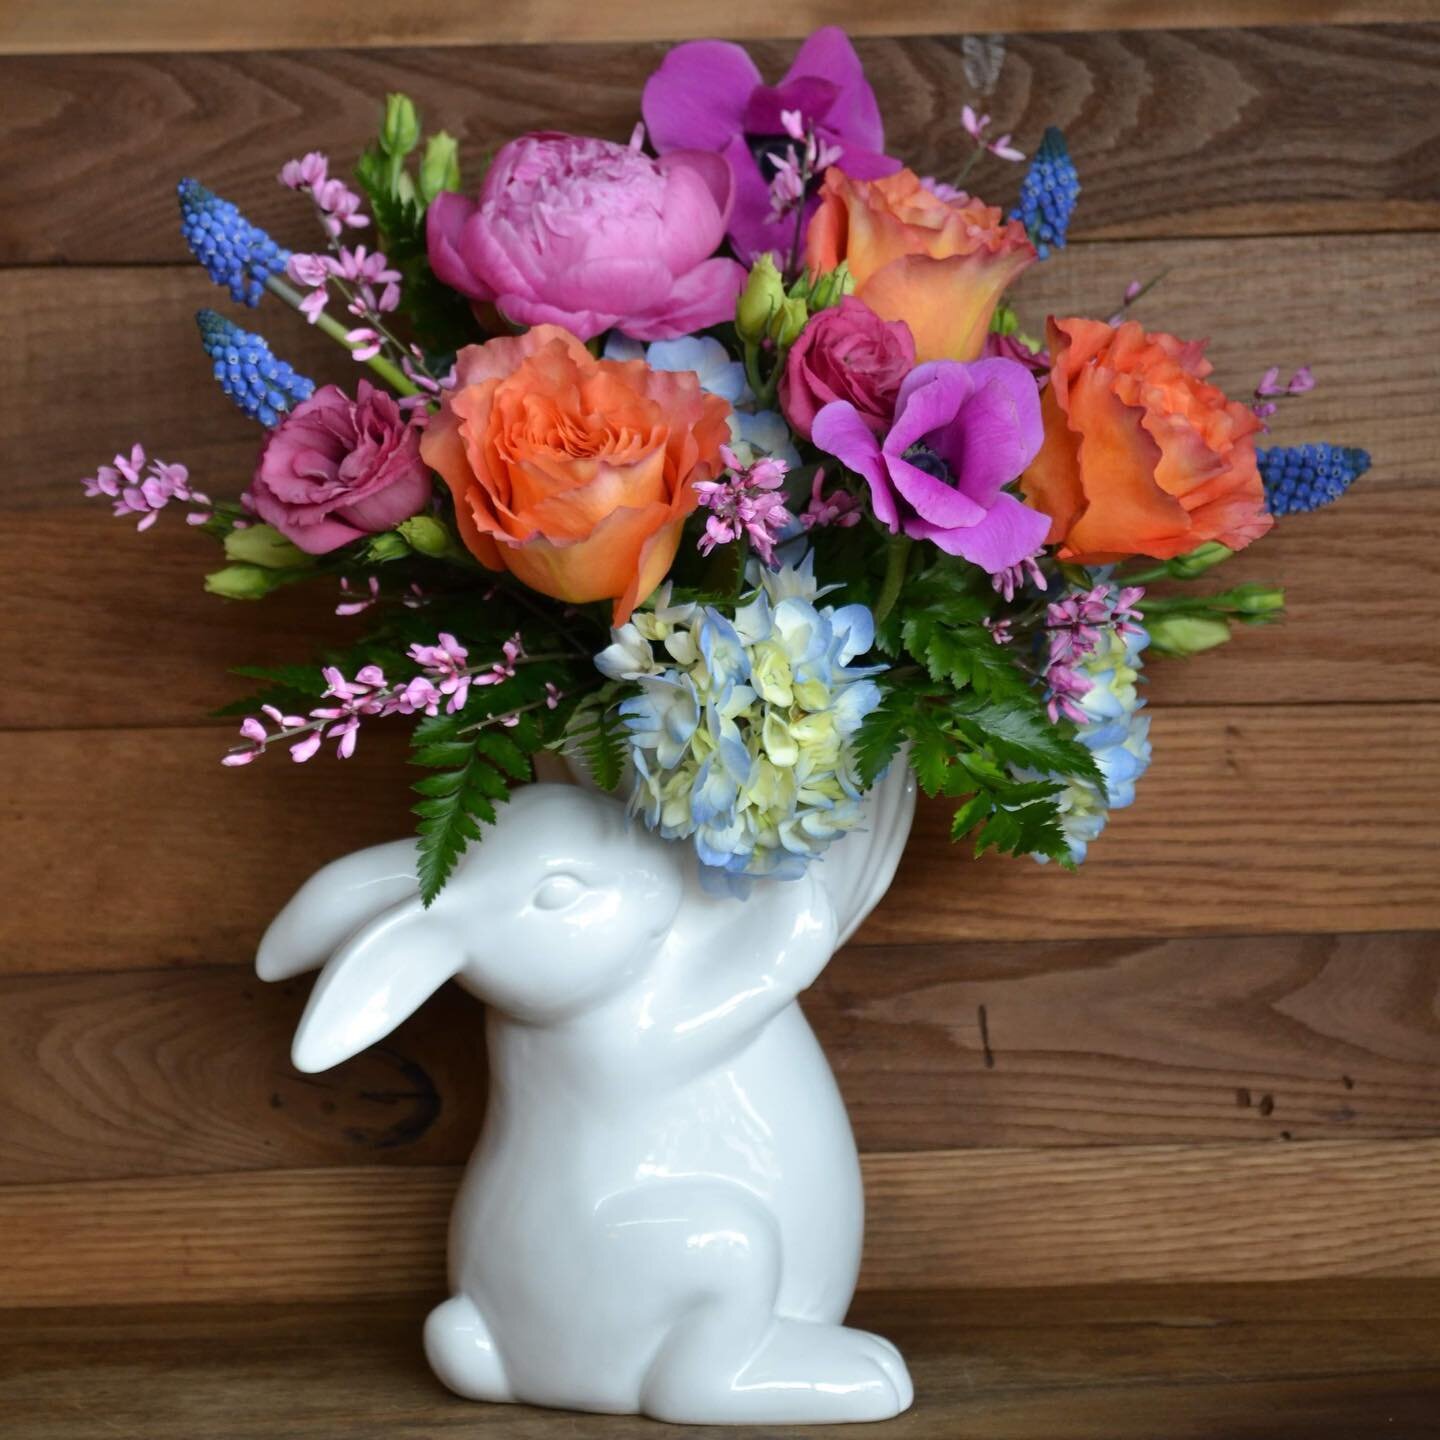 Visit our website to order the most beautiful bunny bouquets for your Easter Celebration. 
www.AlexandersFloralDesigns.com 

#BunniesOfInsta #SpringBunny #BunnyBouquets #ShopBunnies #ClevelandBunnies #BUNNYinCLE #ClevelandFlowers #ClevelandFlorist #N